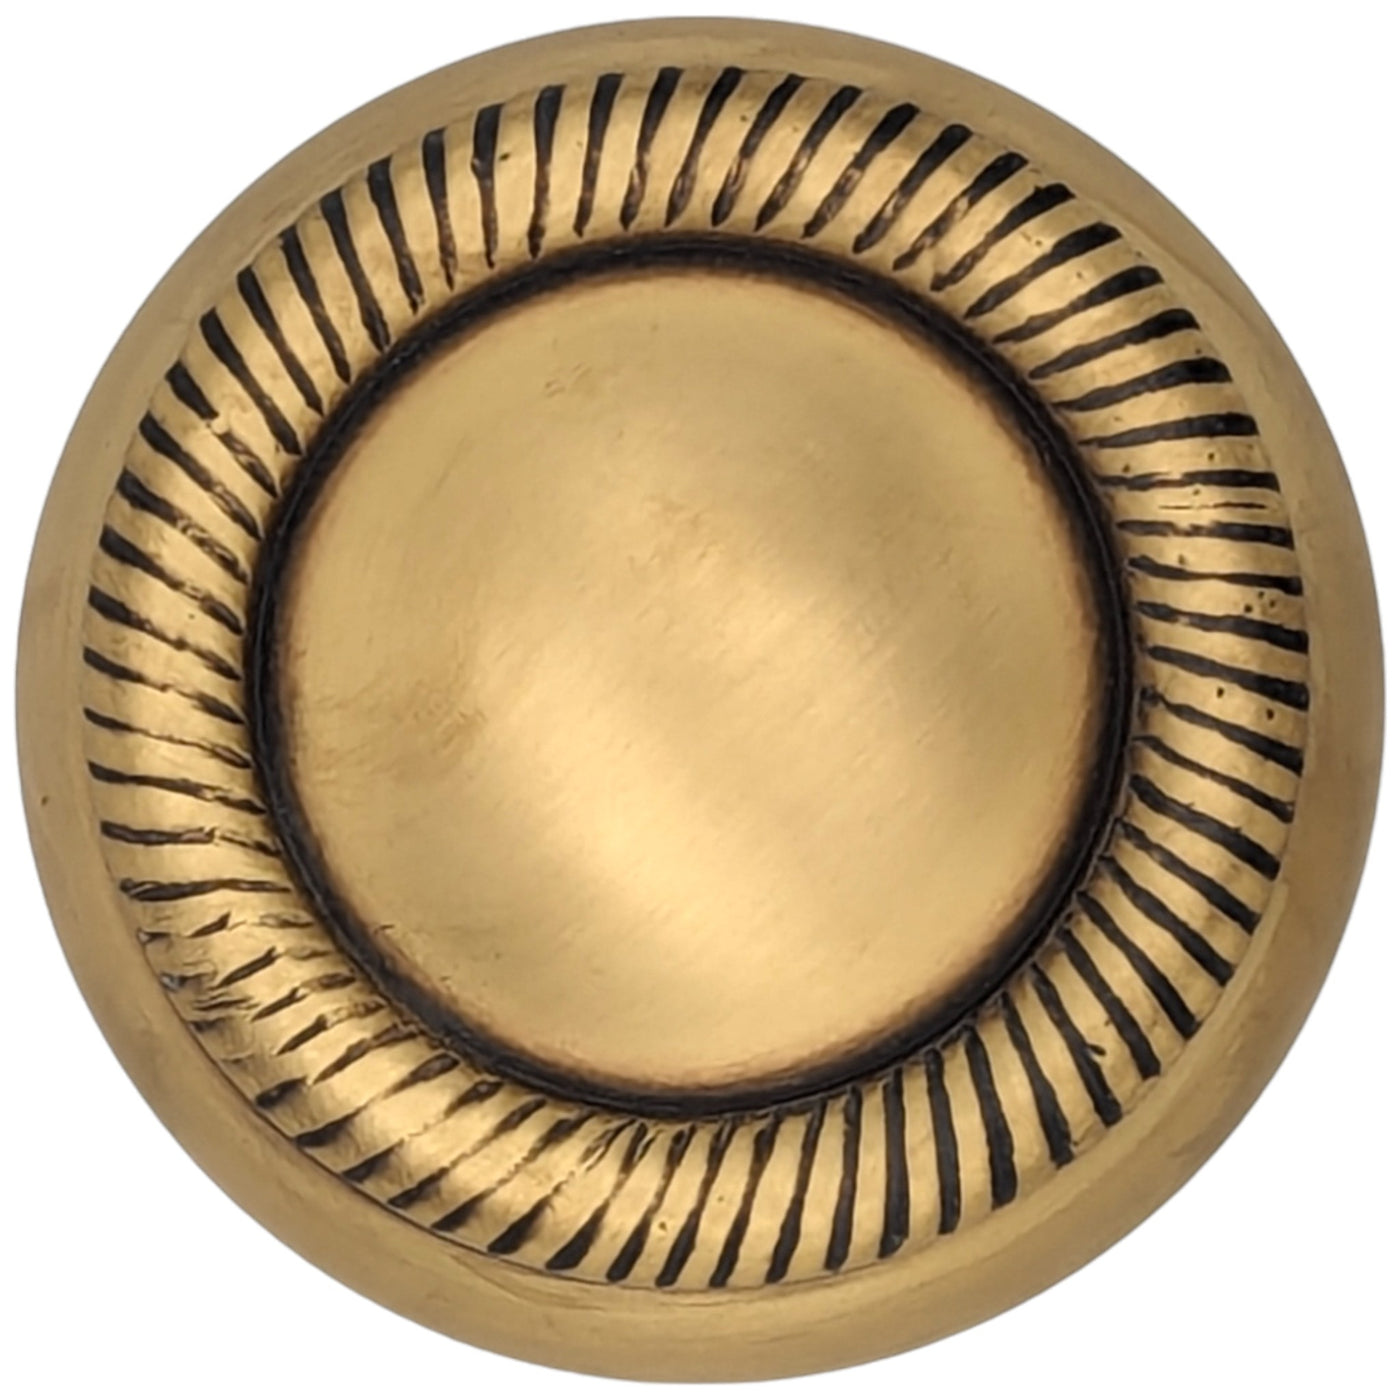 Georgian Roped Solid Brass Spare Door Knob Set (Several Finishes Available)